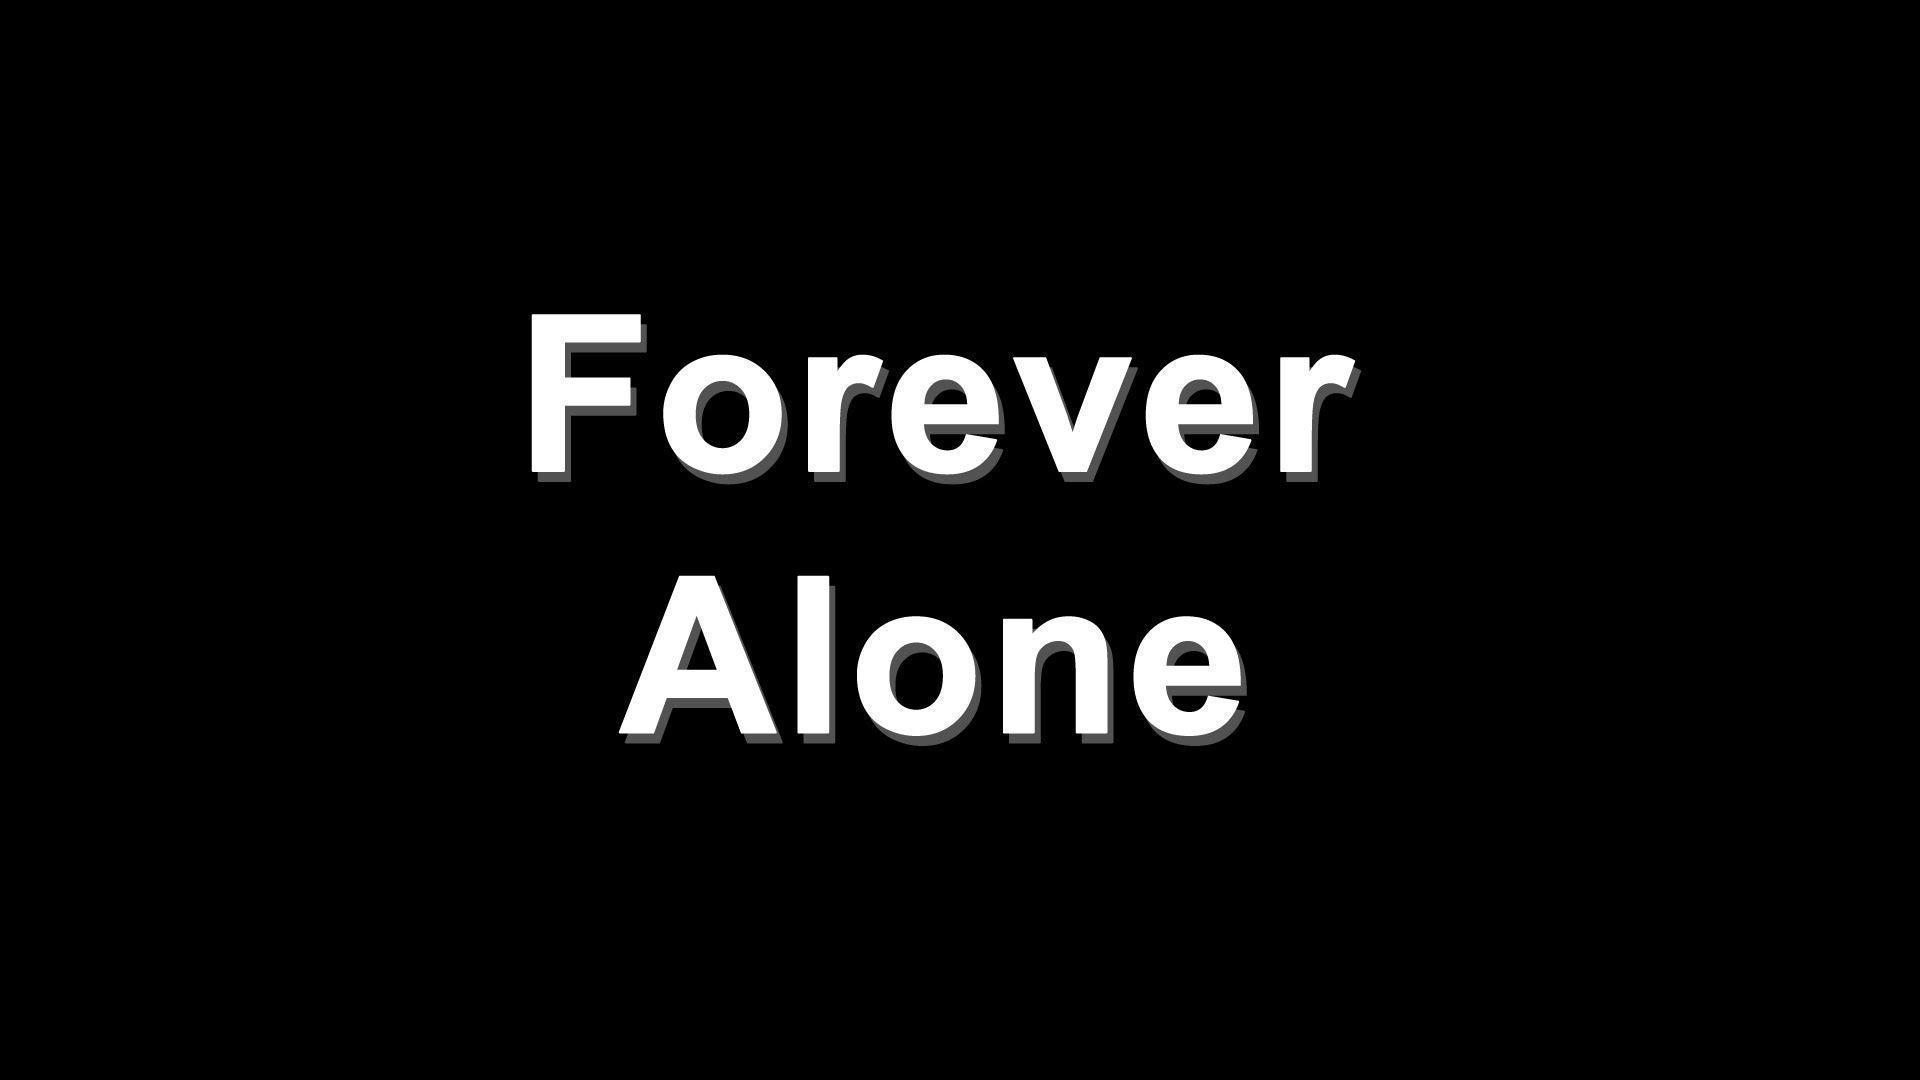 Alone Forever Wallpapers - Wallpaper Cave